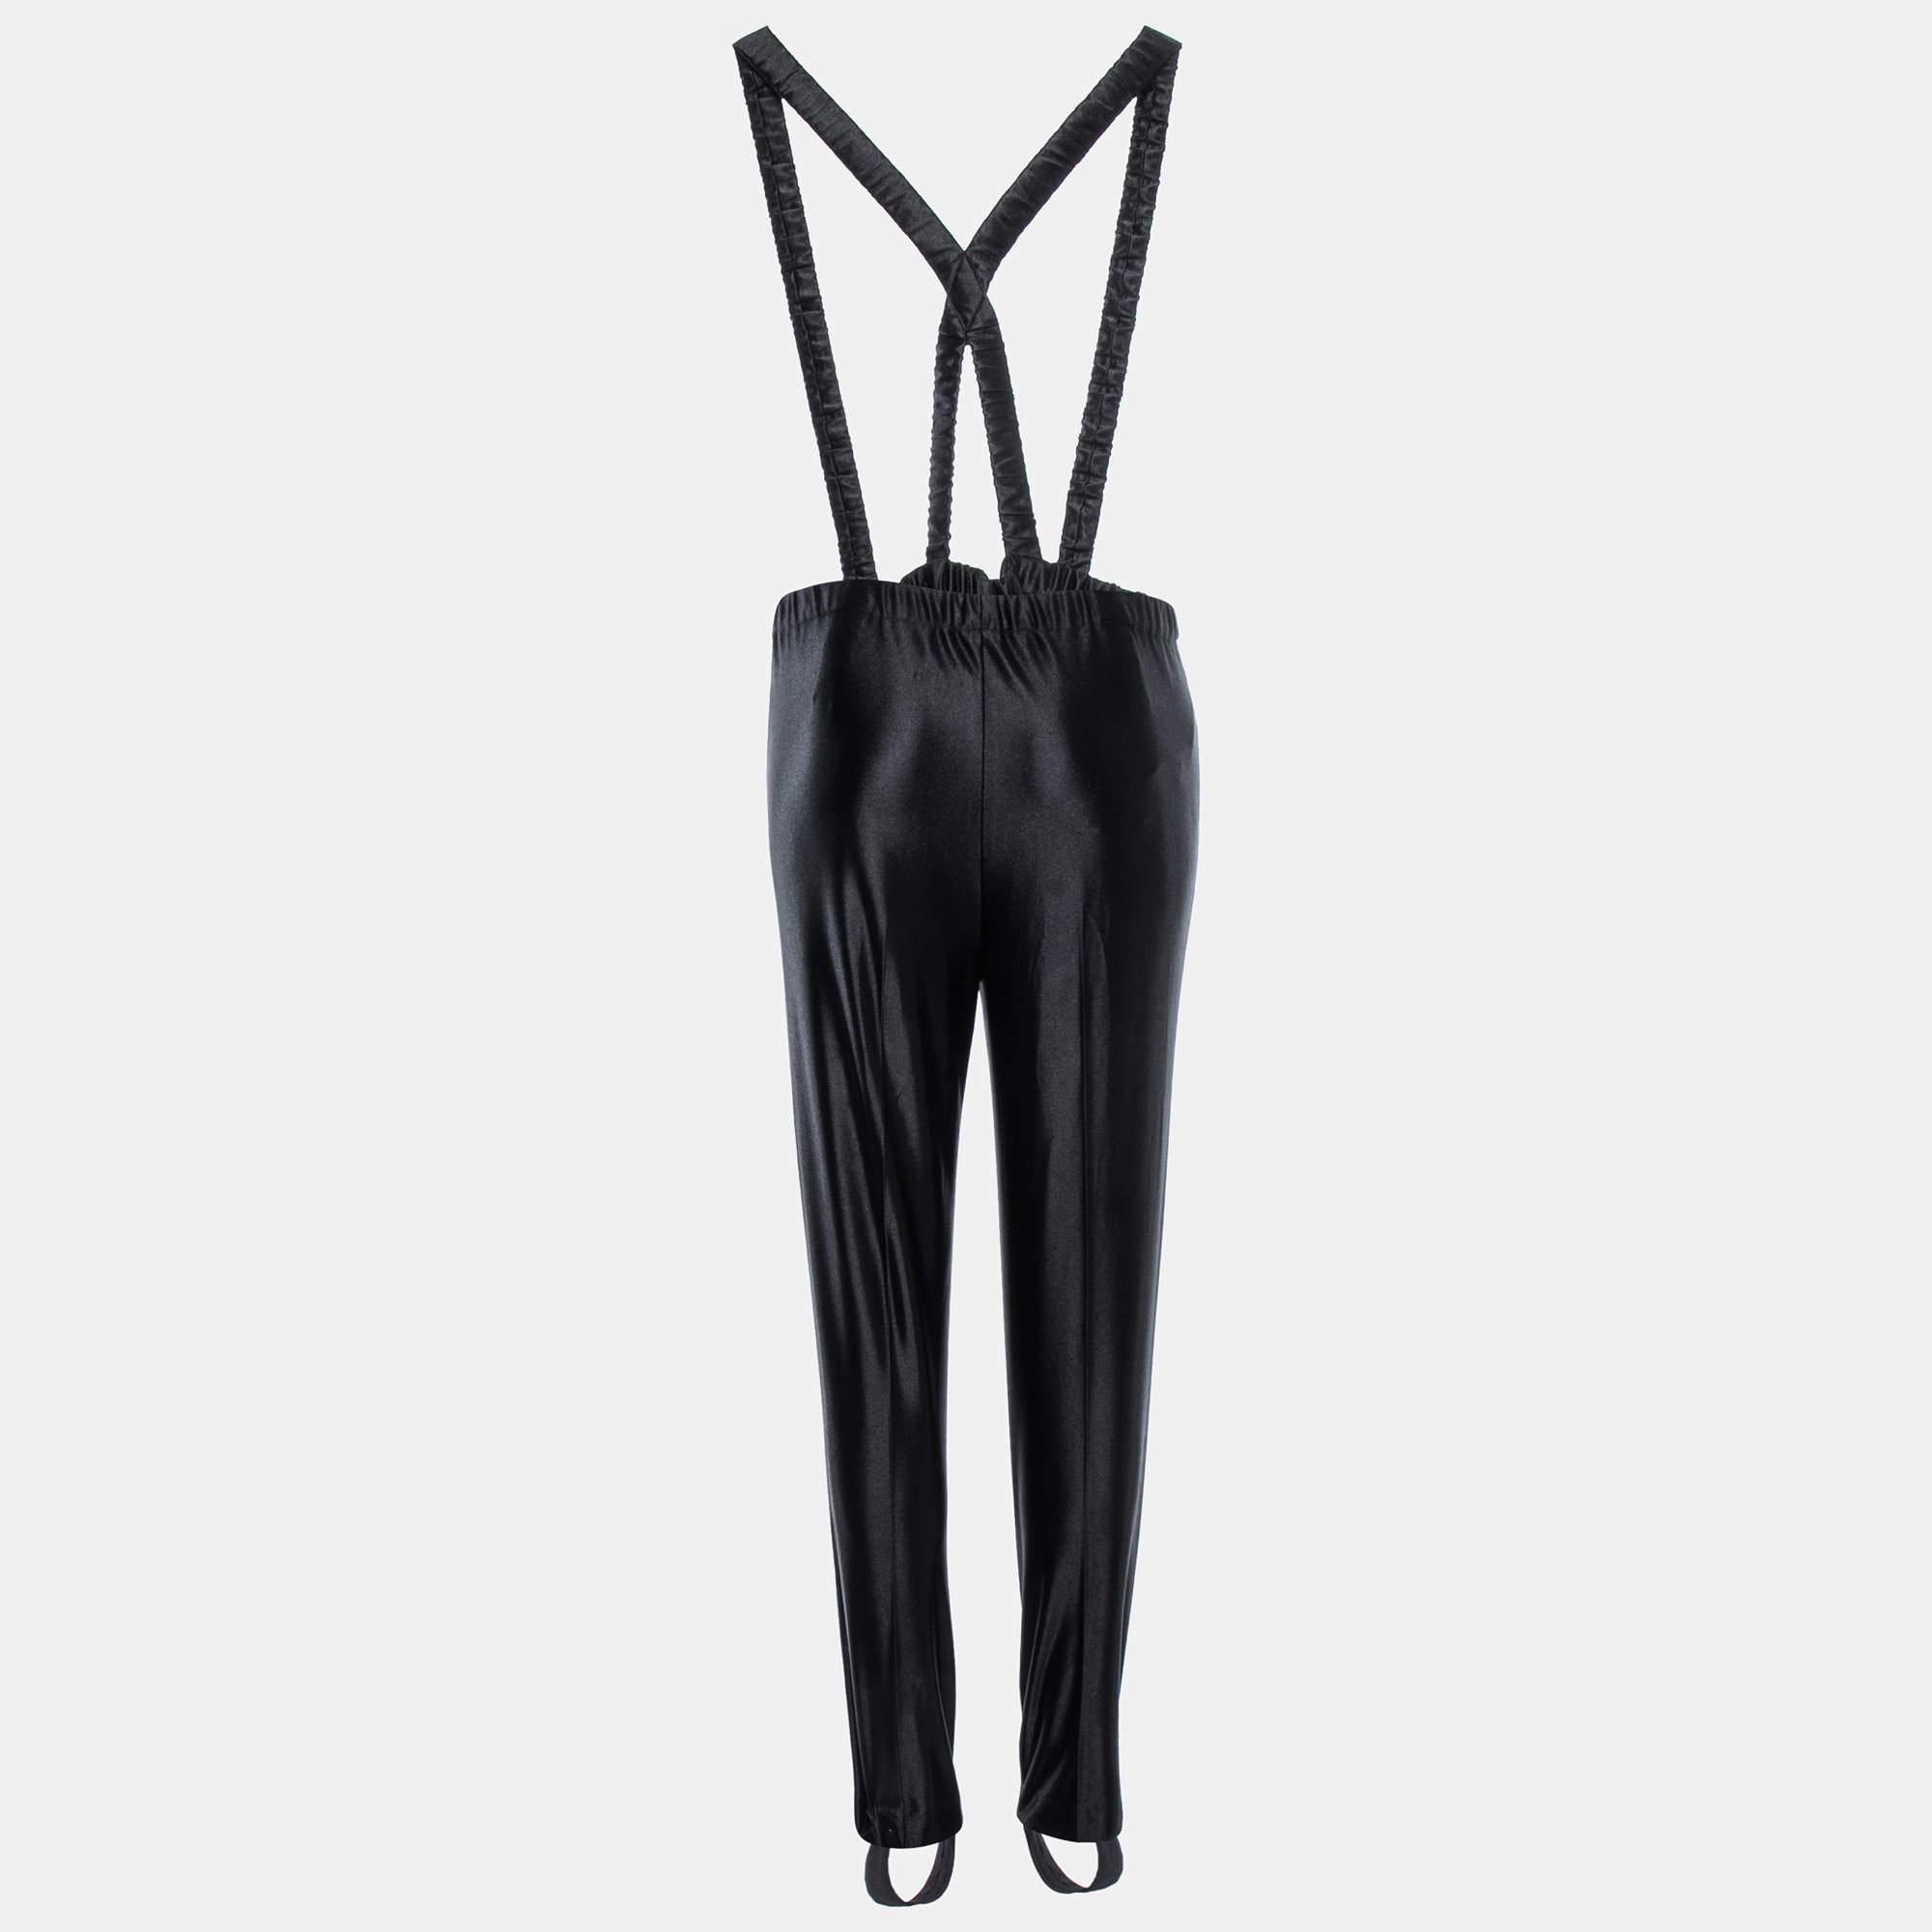 The Gucci pants are a fashion statement. Crafted from high-quality synthetic materials, they feature a classic black color and attached suspenders for a trendy twist. These pants offer a blend of style and sophistication, perfect for those seeking a